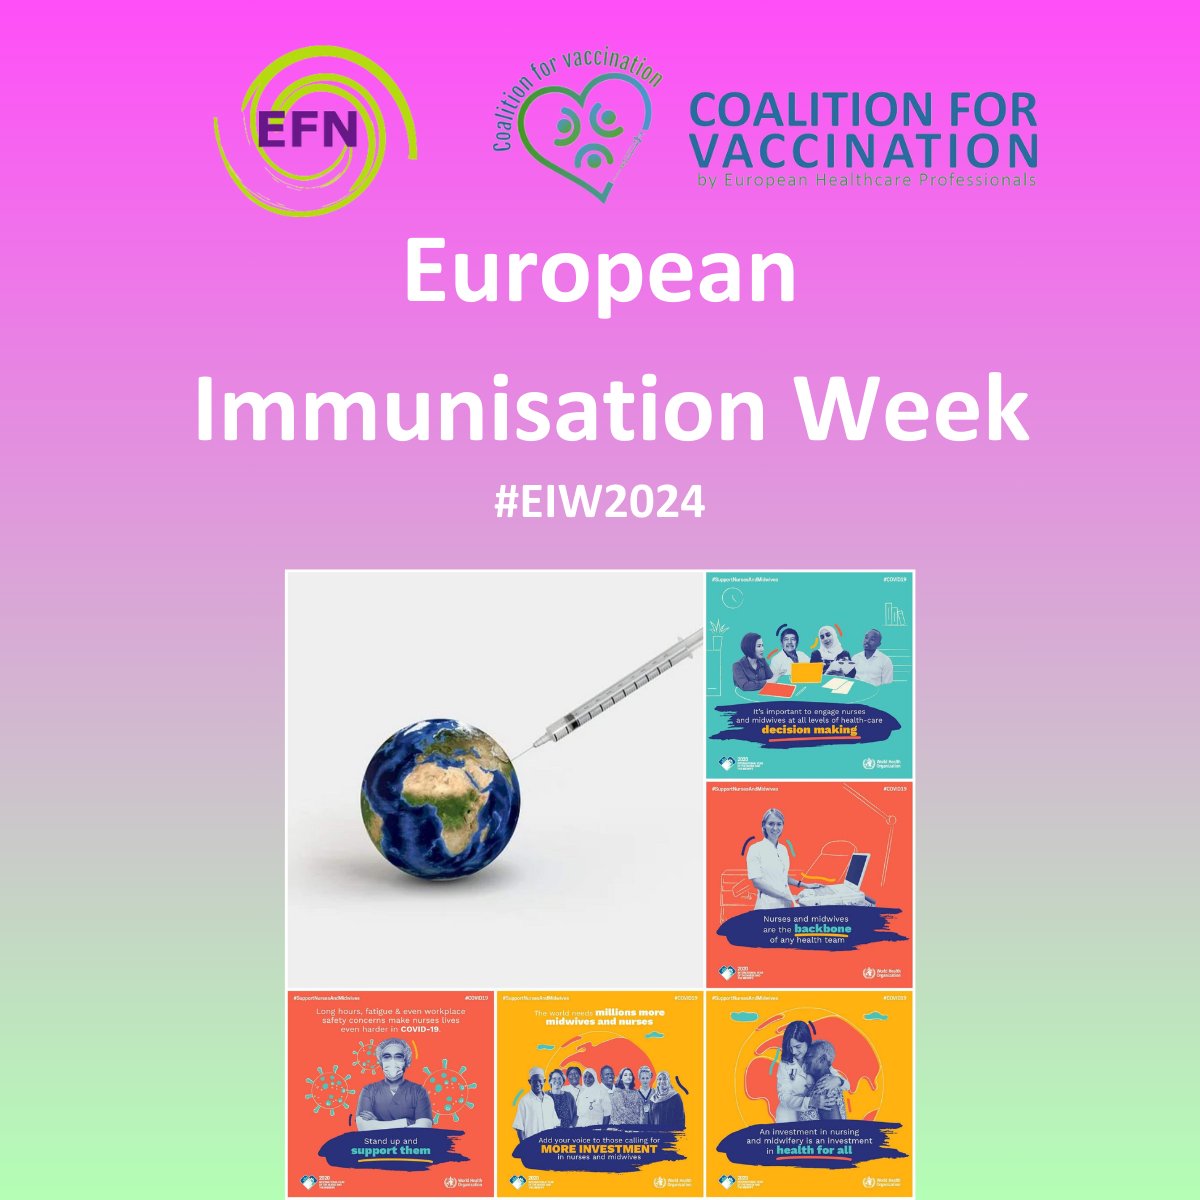 Nurses play a key role in ensuring fair and equitable access to vaccines for all. That is why they must continue to be supported at national and EU level. Invest in your nurses! #EFN #EIW2024 #Nursesforvaccination #Nurses #Prevention #Longlifeforall #EPI #Frontlinenurses